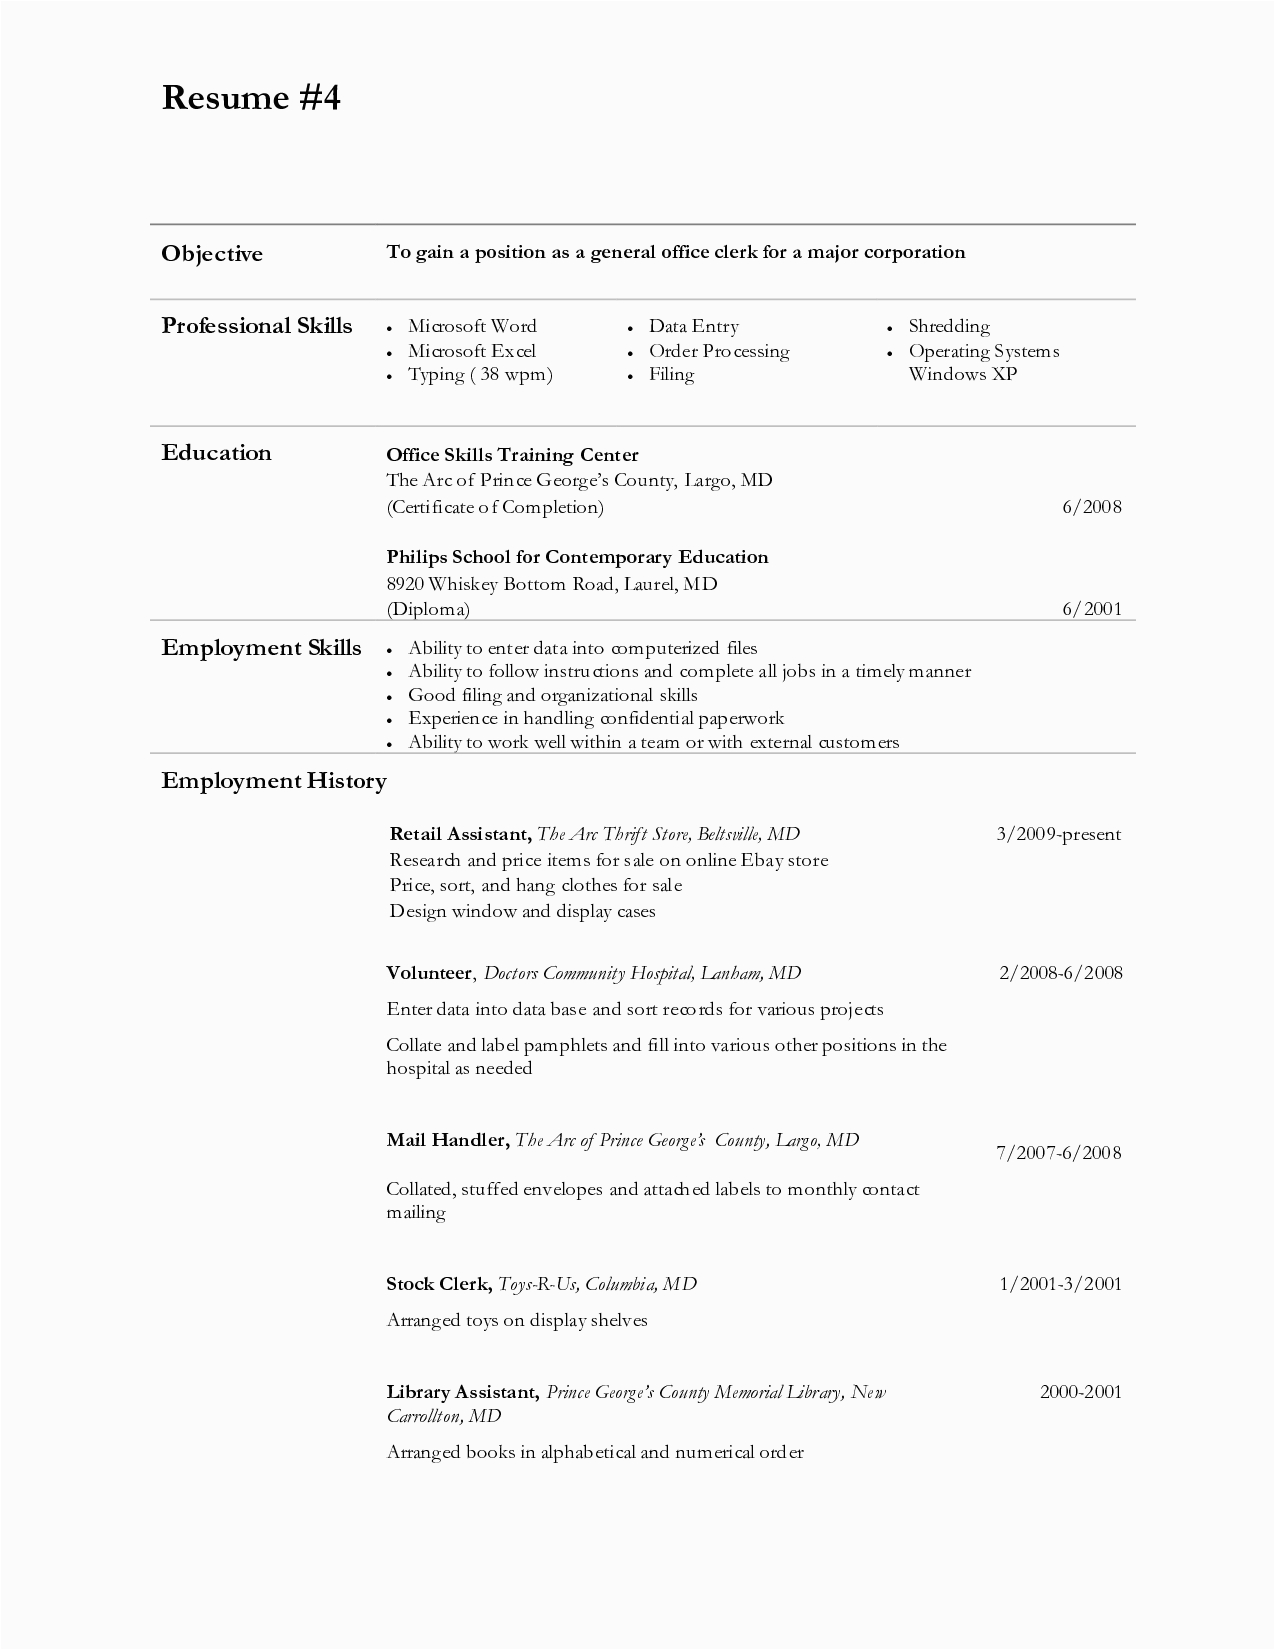 Sample Resume for toys R Us toys R Us Resume Examples Resume Templates